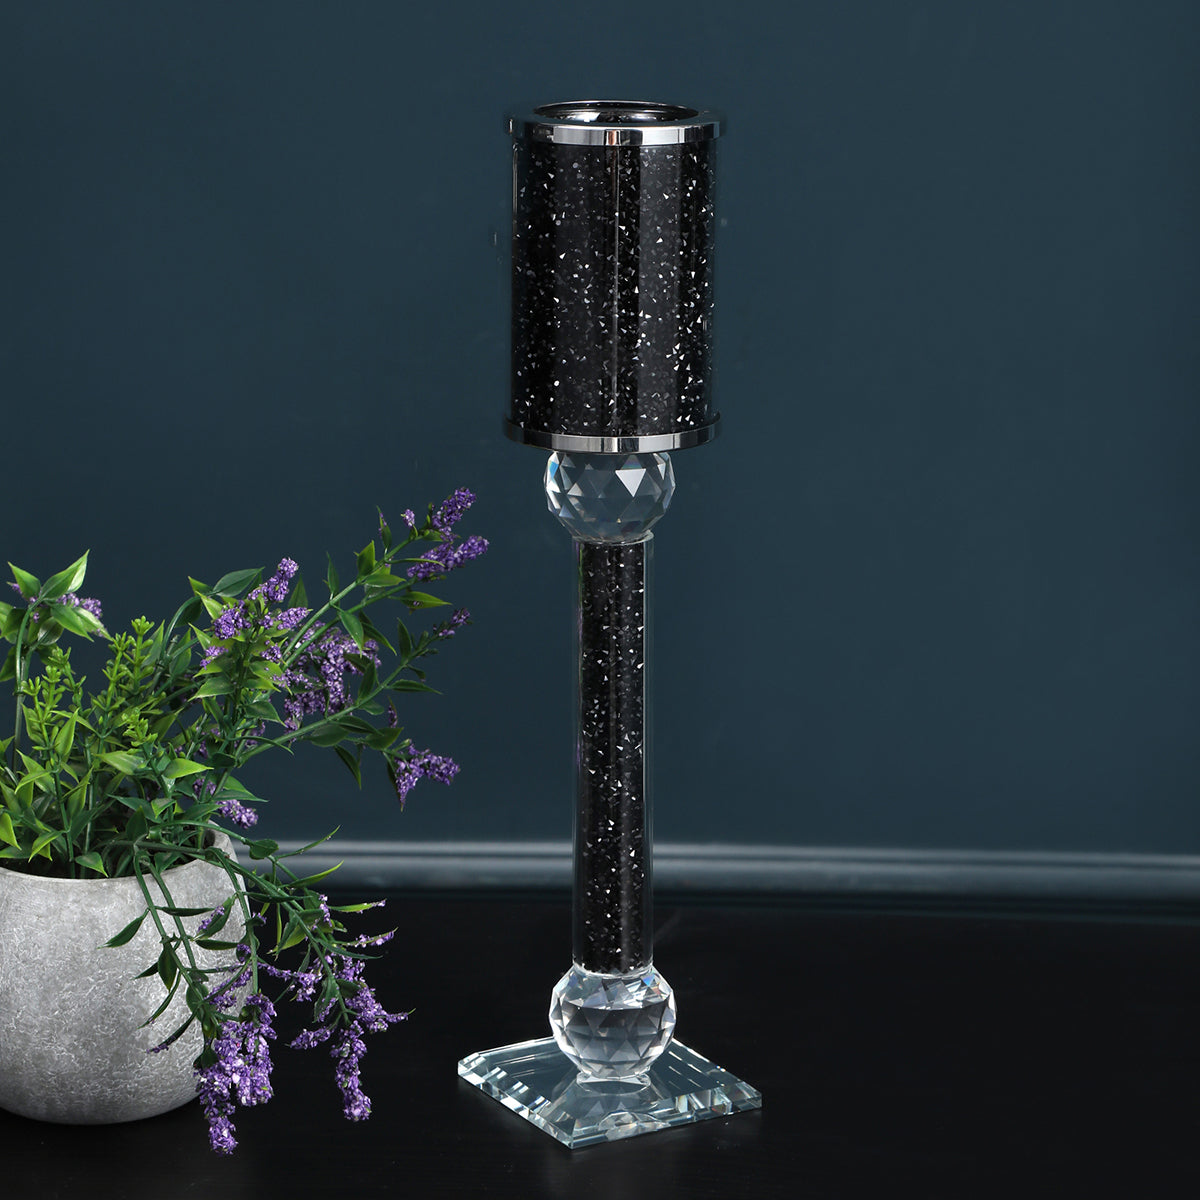 Ambrose Exquisite Large Candle Holder 2.75" L X 2.75" black-glass